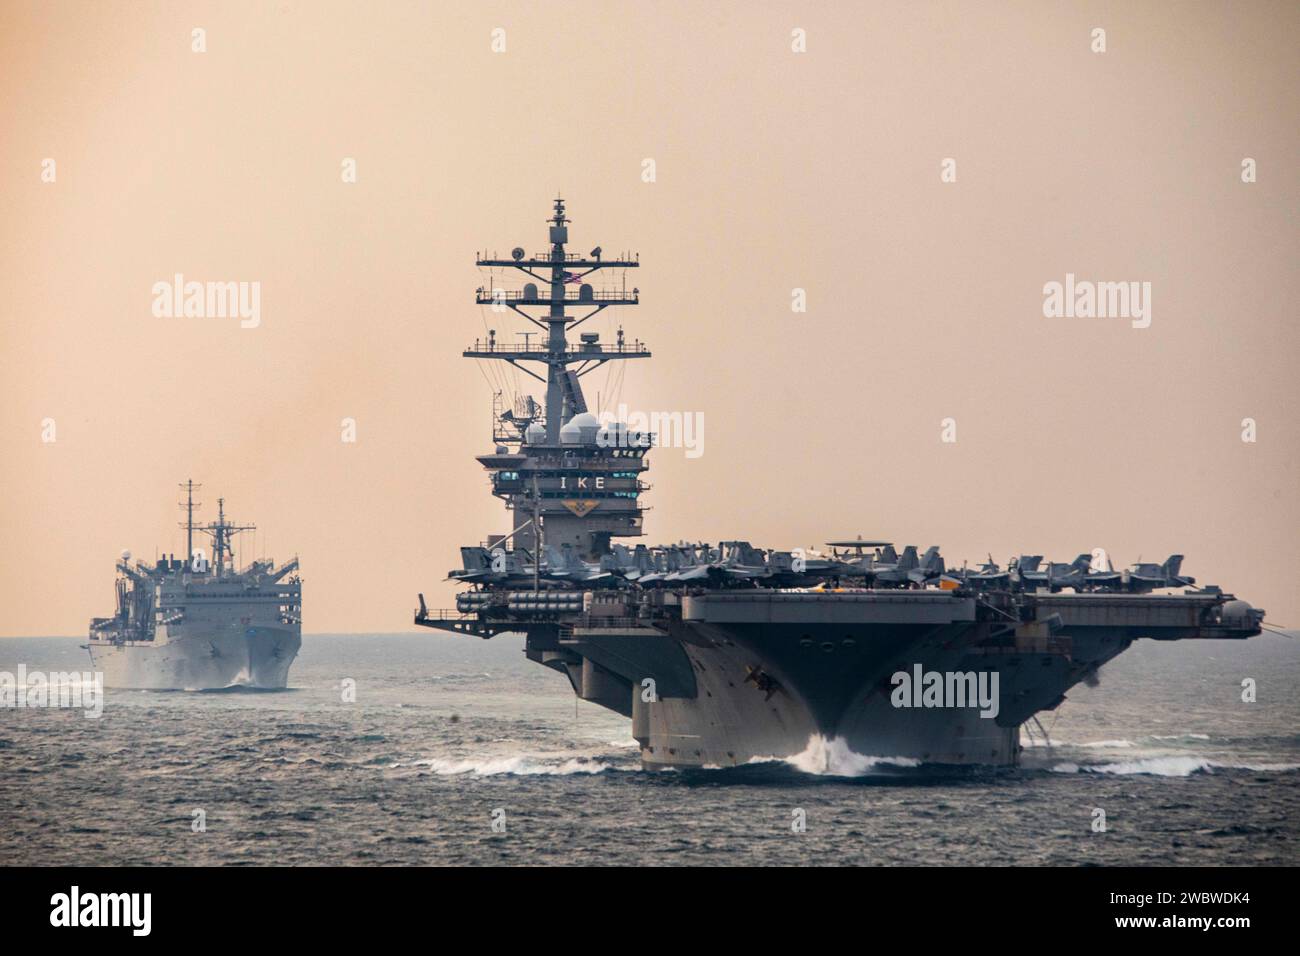 Strait of Hormuz, United States. 14 December, 2023. The U.S. Navy Nimitz-class aircraft carrier USS Dwight D. Eisenhower leads the fast combat support ship USNS Supply as they transit the Strait of Hormuz during Operation Prosperity Guardian, December 14, 2023 in the Persian Gulf. OPG is a multinational coalition to support maritime security and counter attacks on commercial shipping in the region.  Credit: MC2 Keith Nowak/U.S. Navy Photo/Alamy Live News Stock Photo